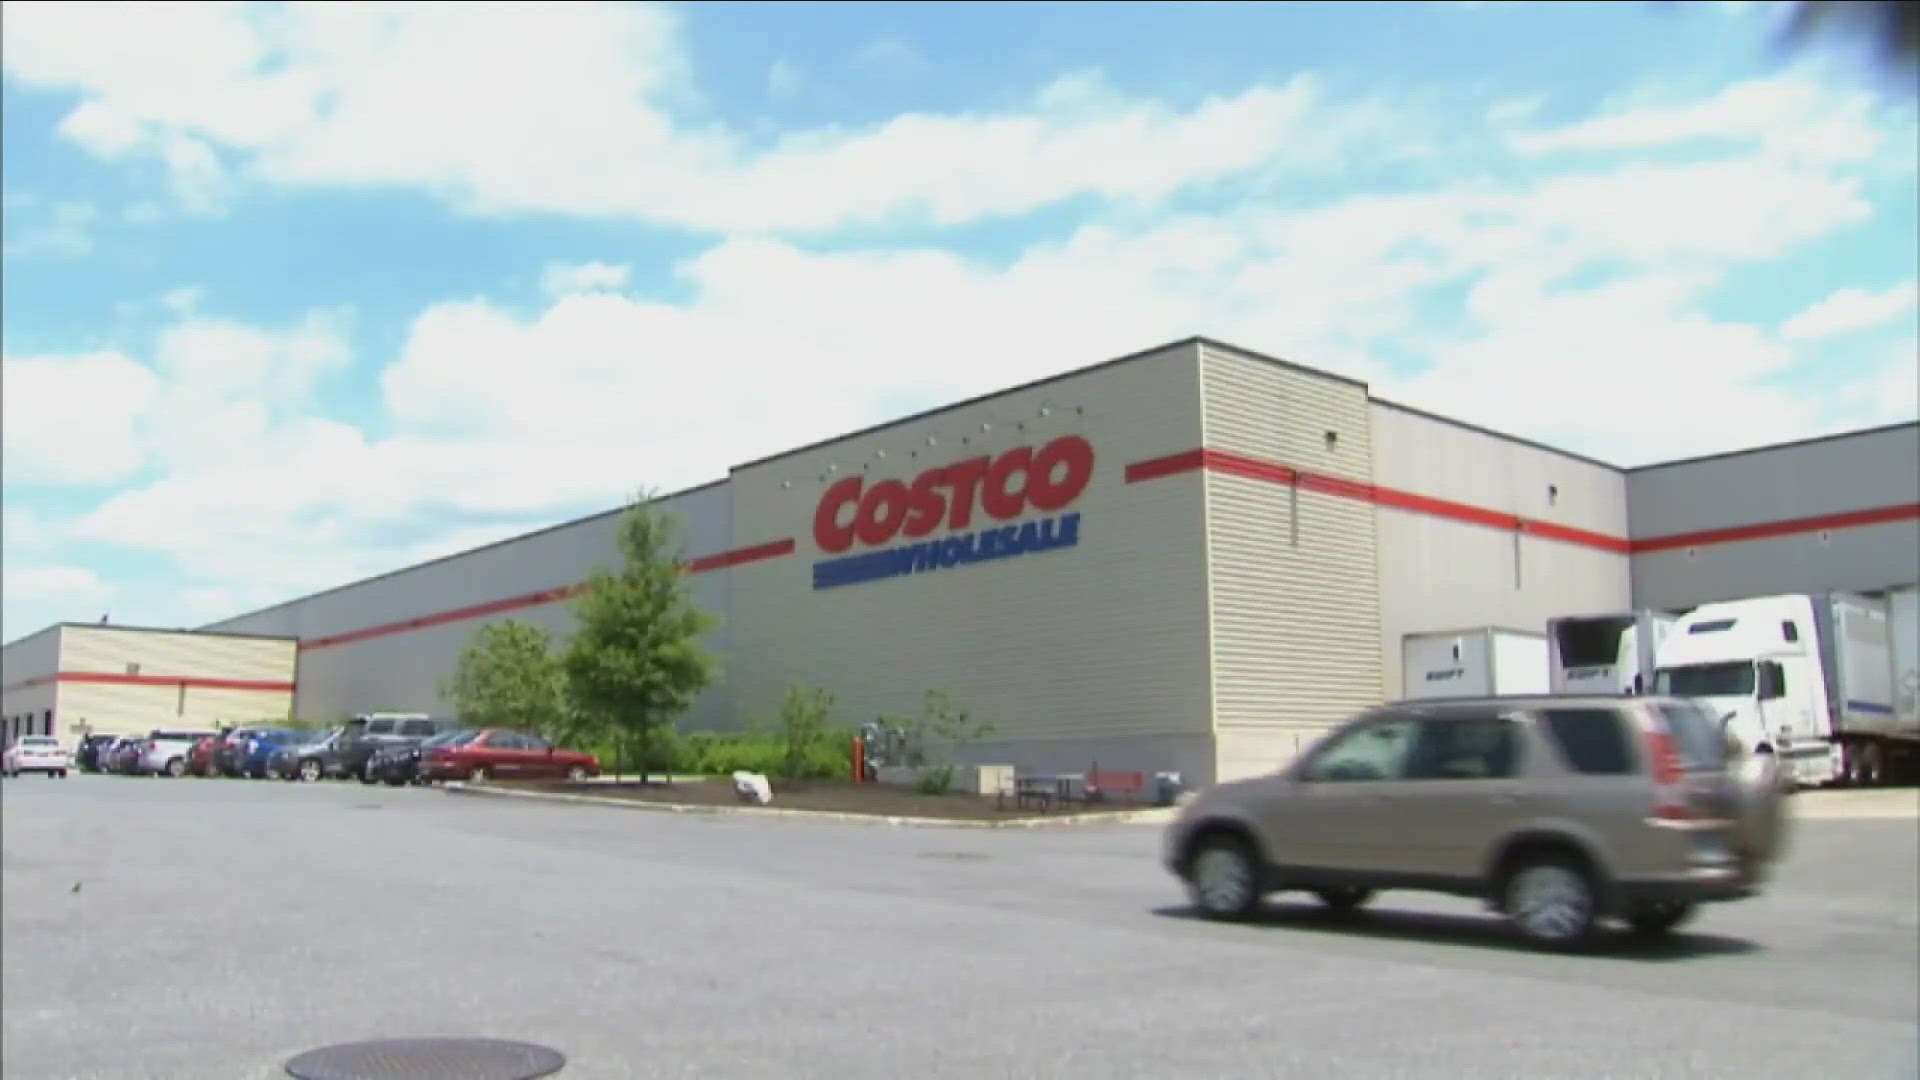 The Costco team has been meeting with local leaders about permits.